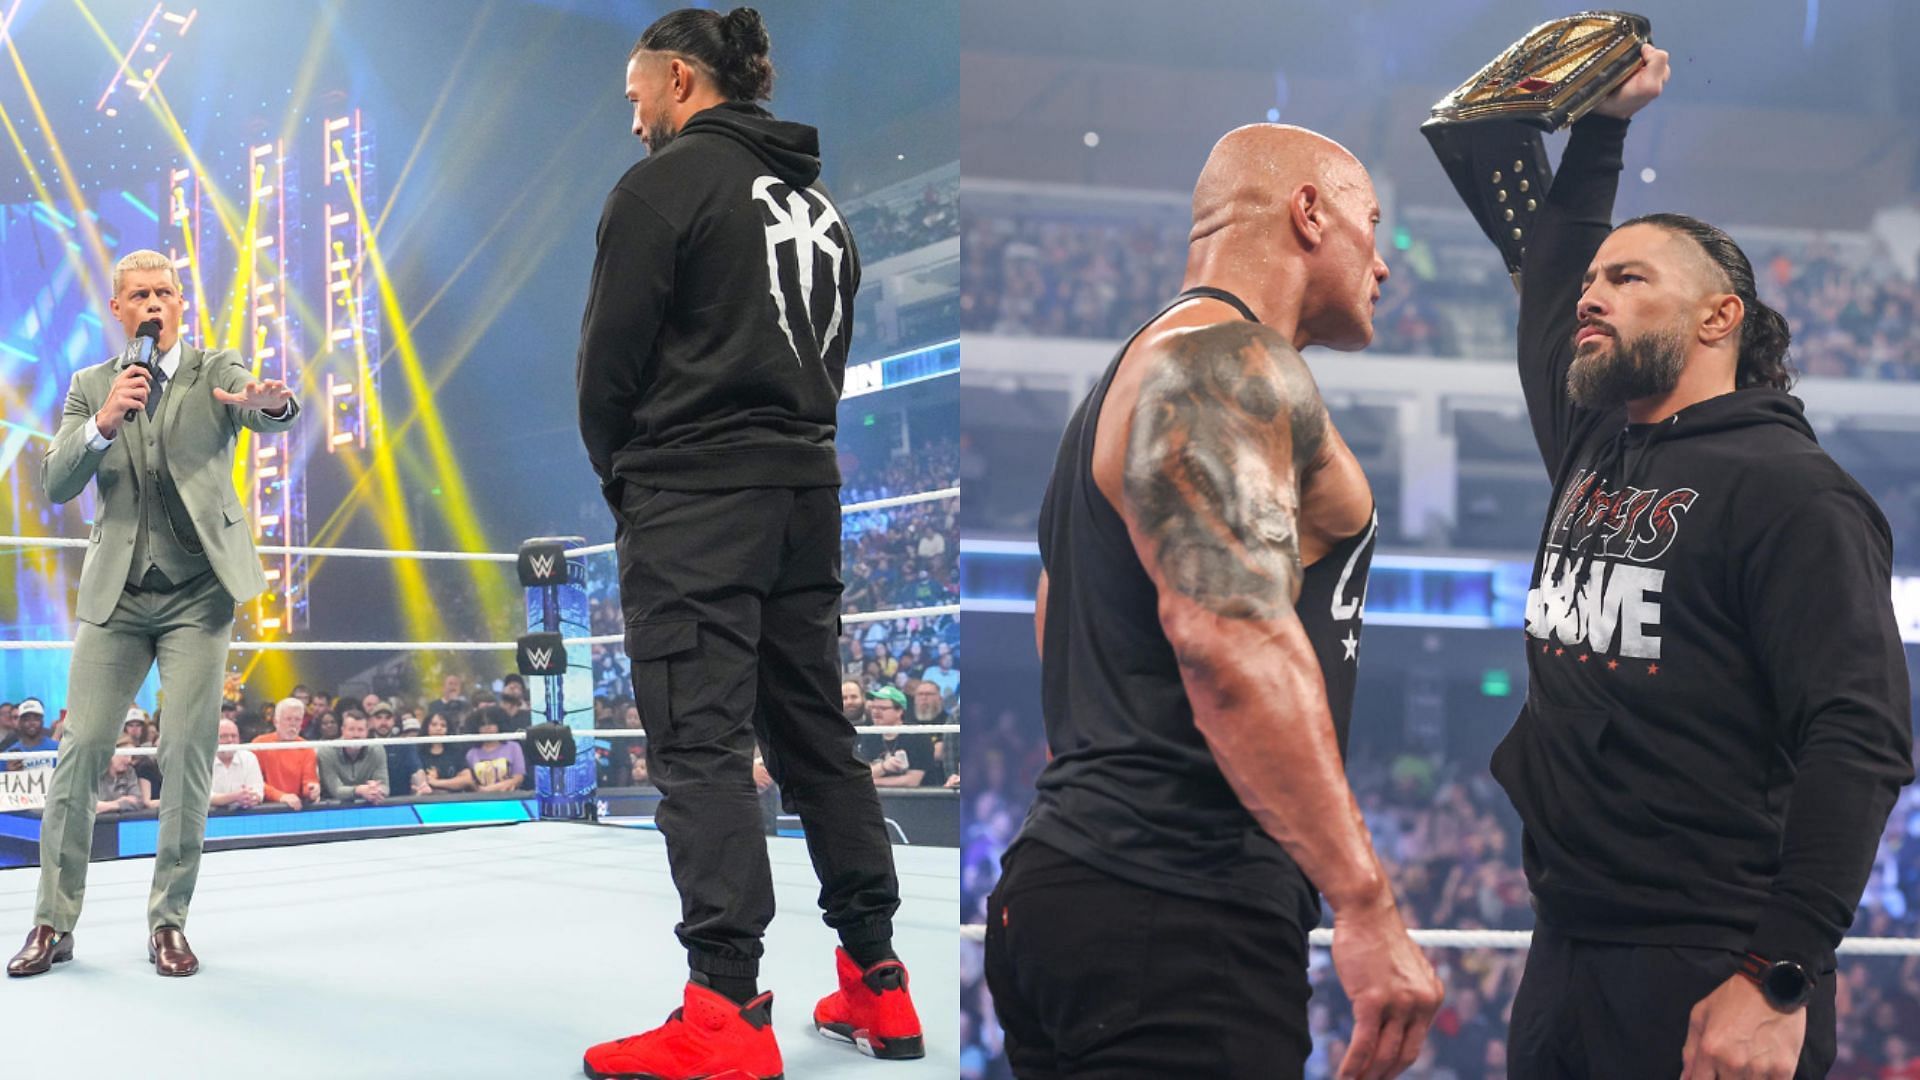 The Rock is set to replace Cody Rhodes as the challenger to Roman Reigns